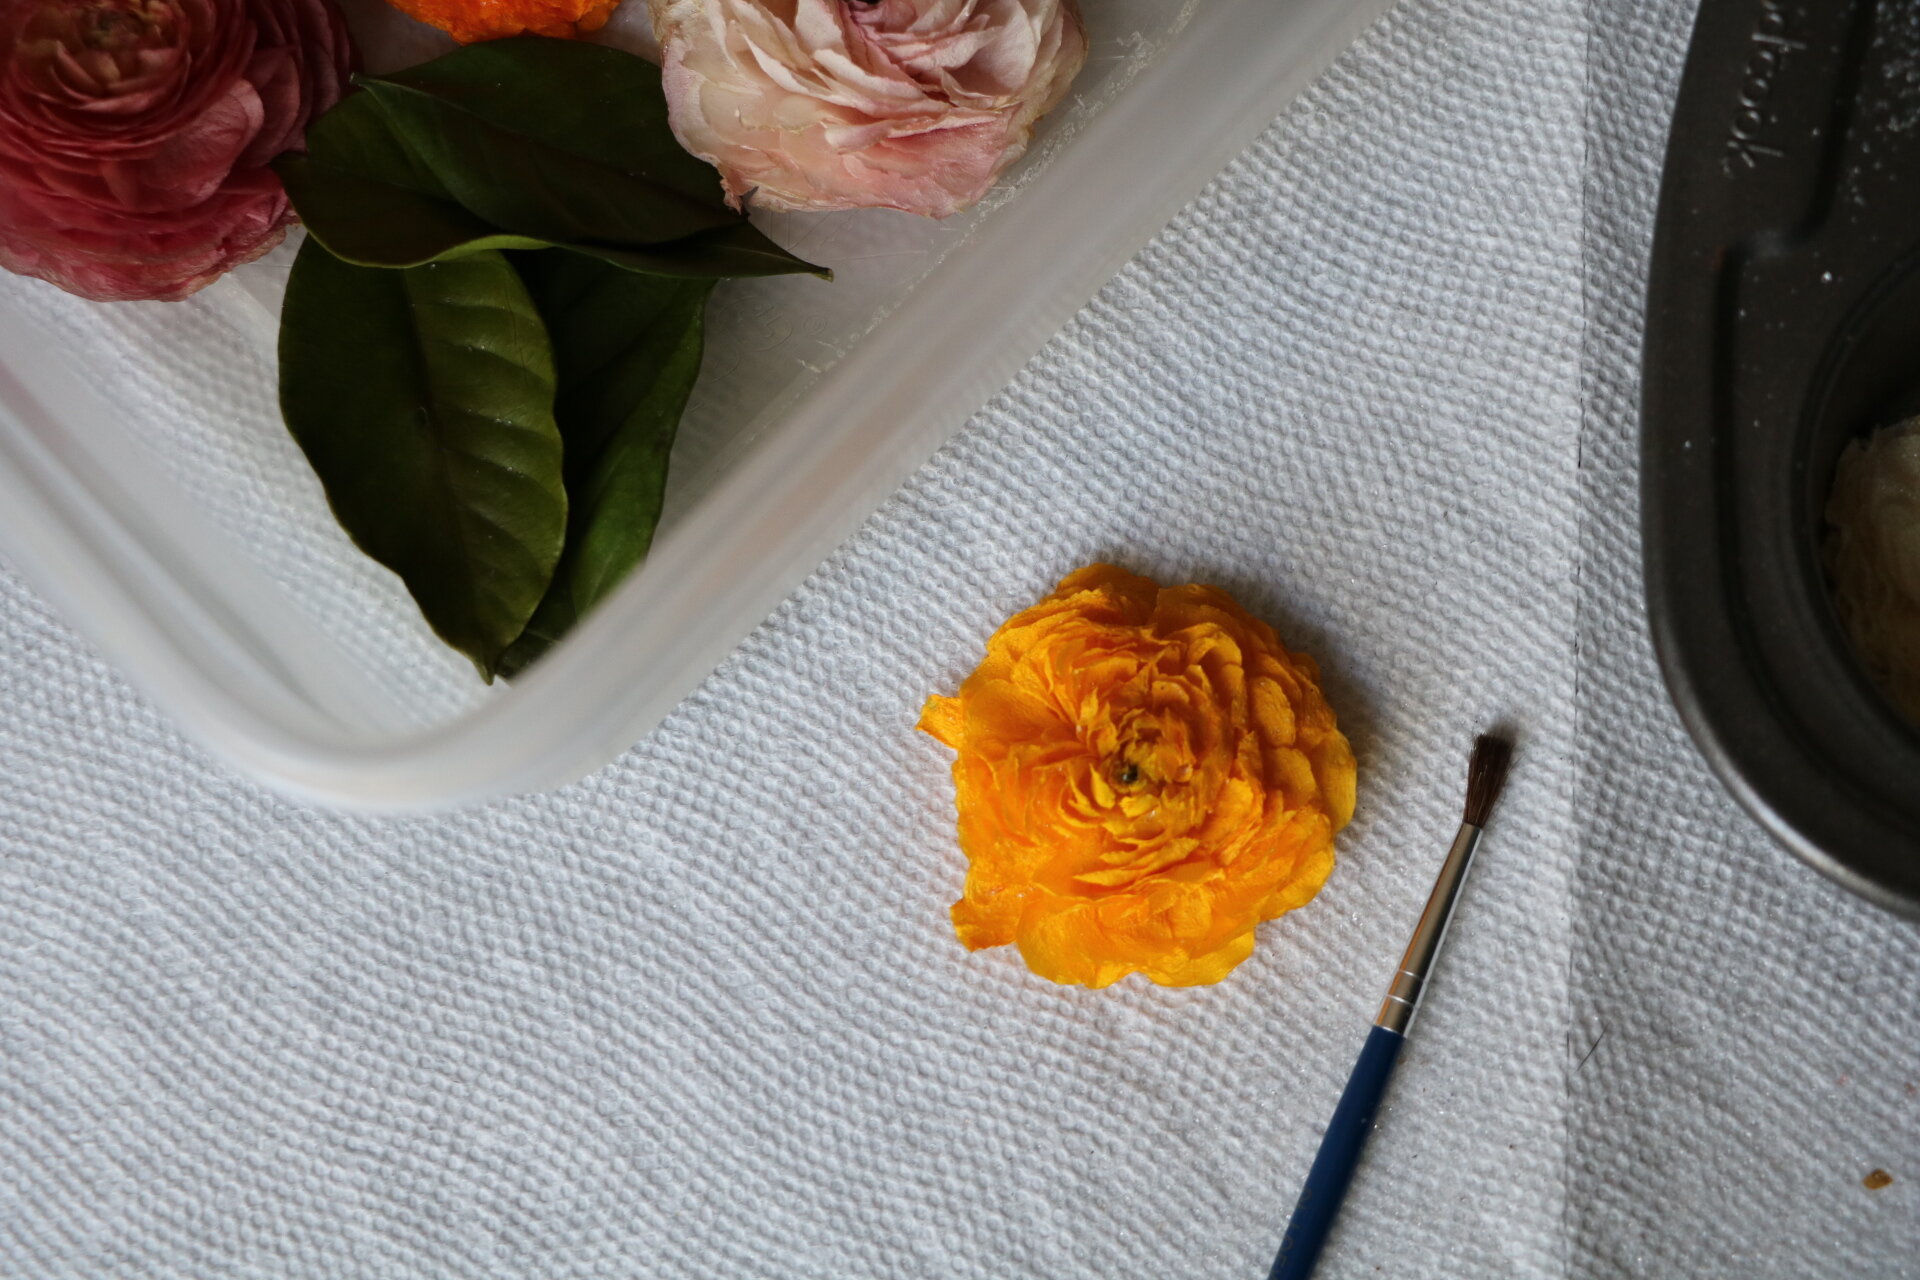 How To Dry Flowers With Silica Gel - Farmhouse & Blooms